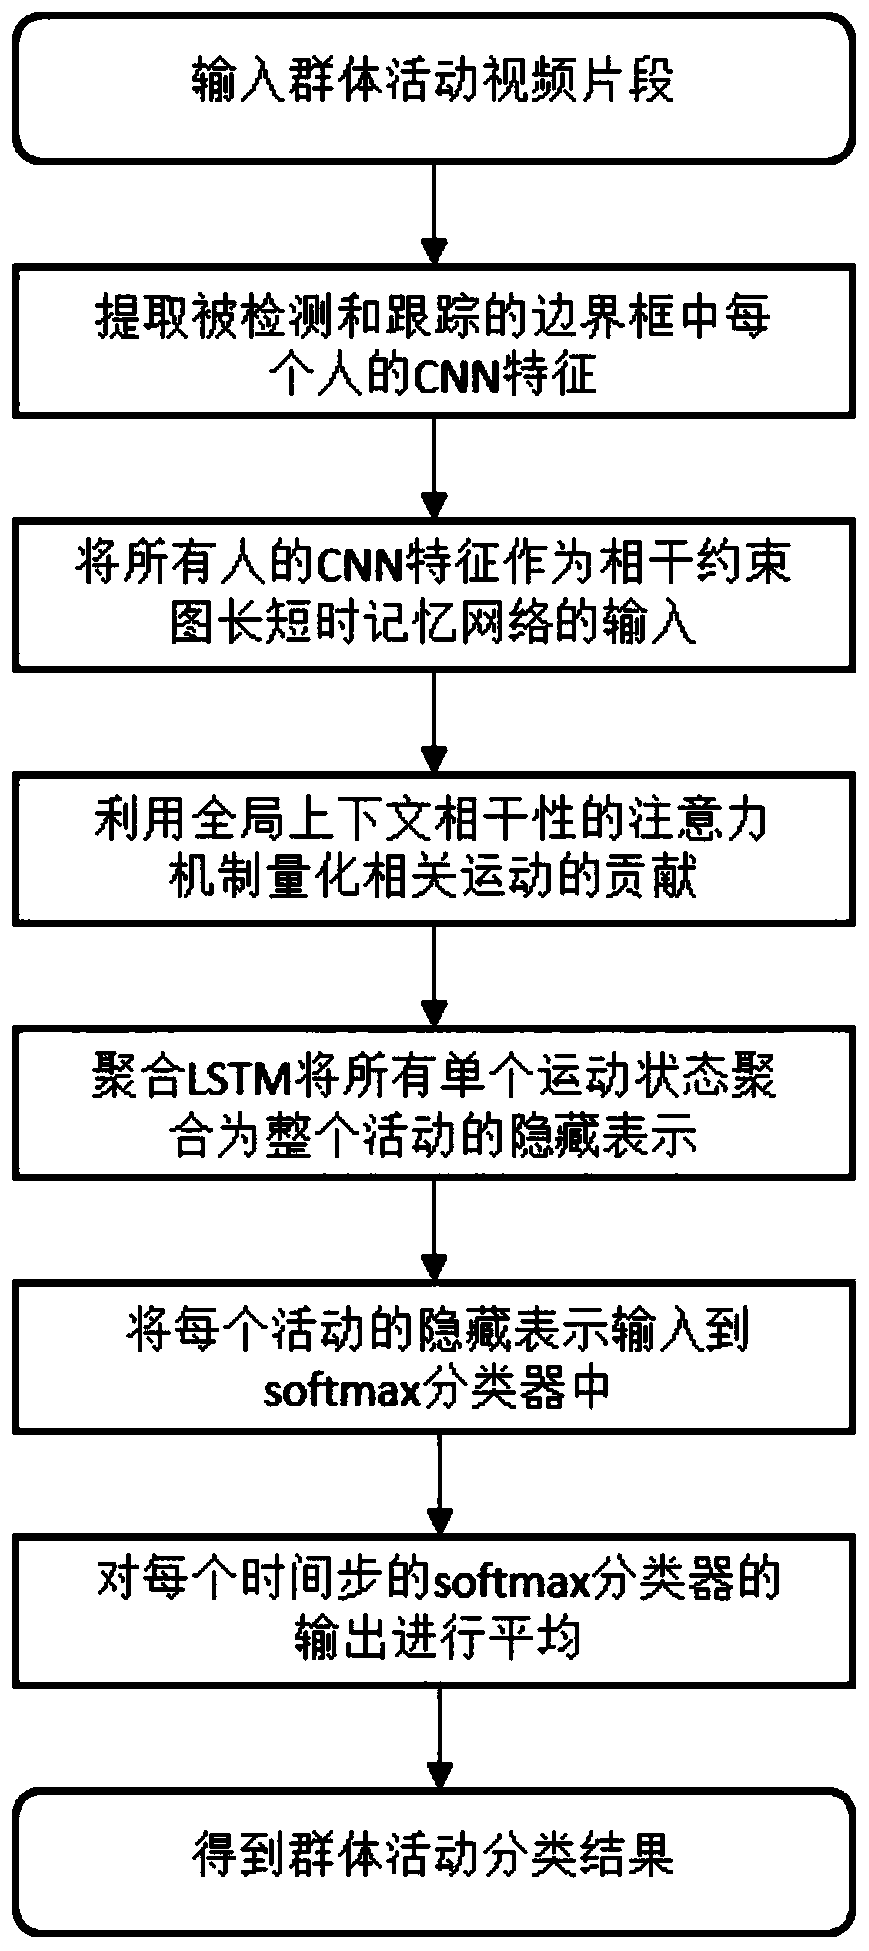 Group activity identification method based on coherence constraint graph long-short-term memory network